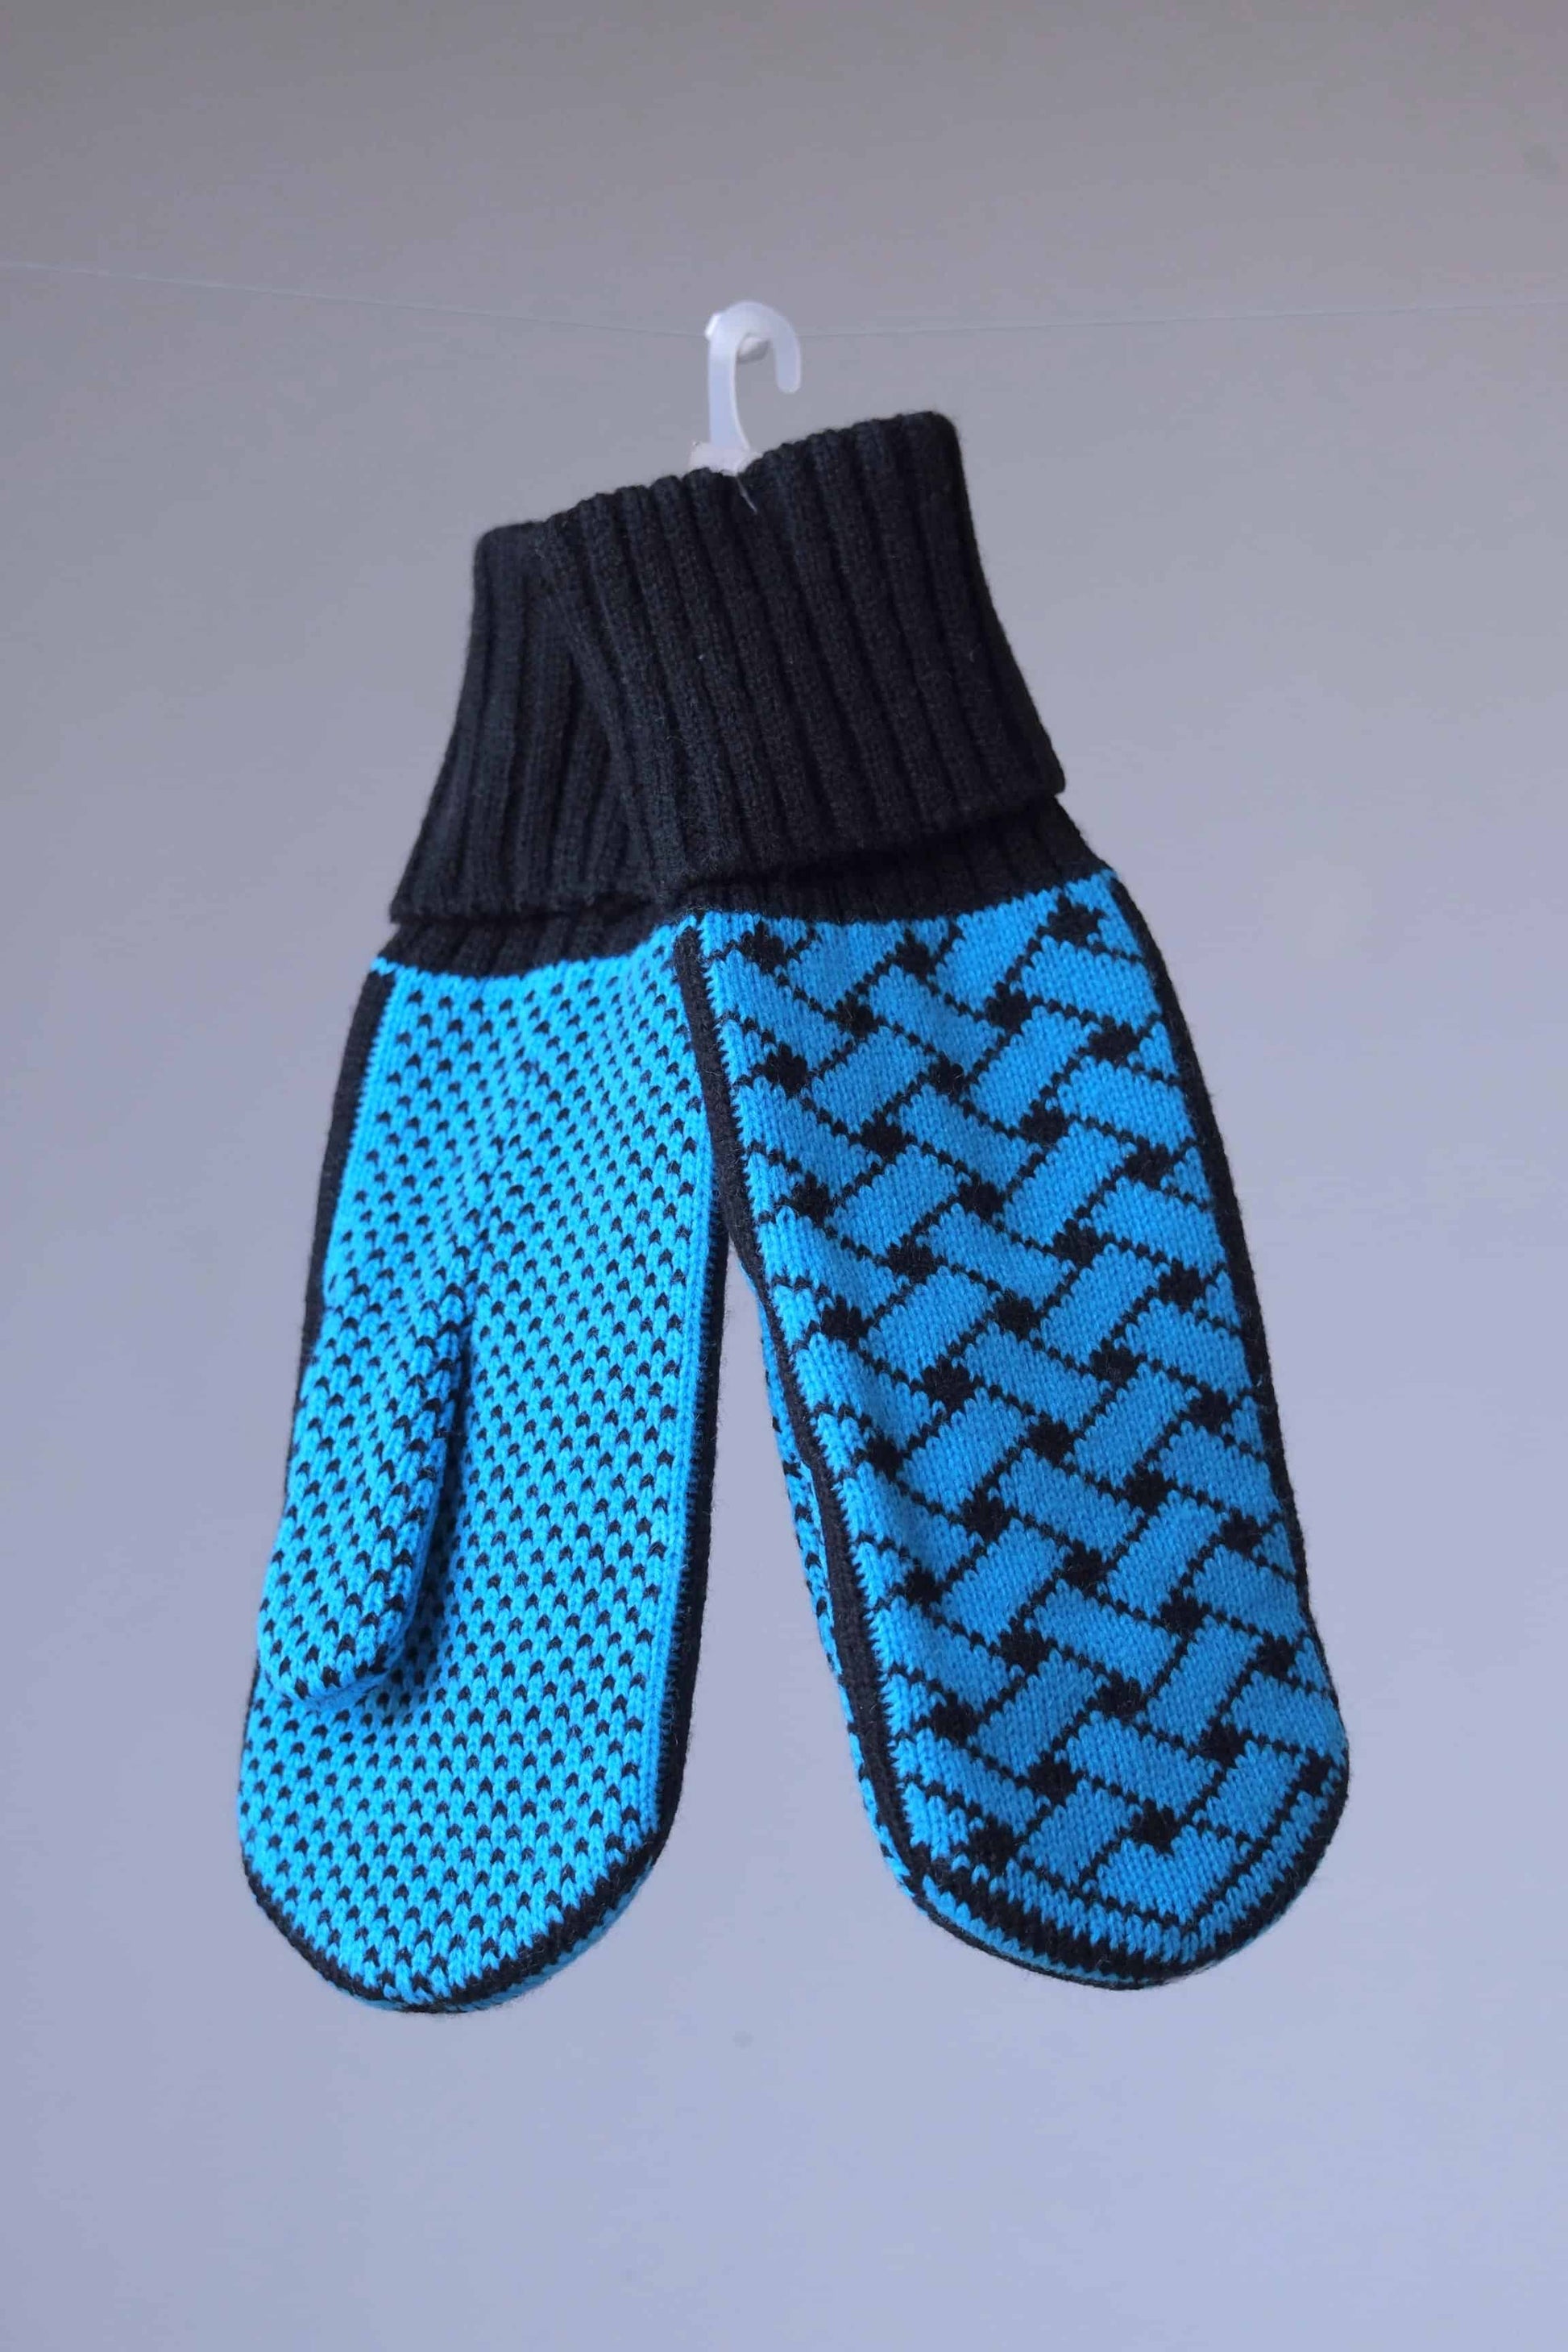 Turquoise and black wool mittens